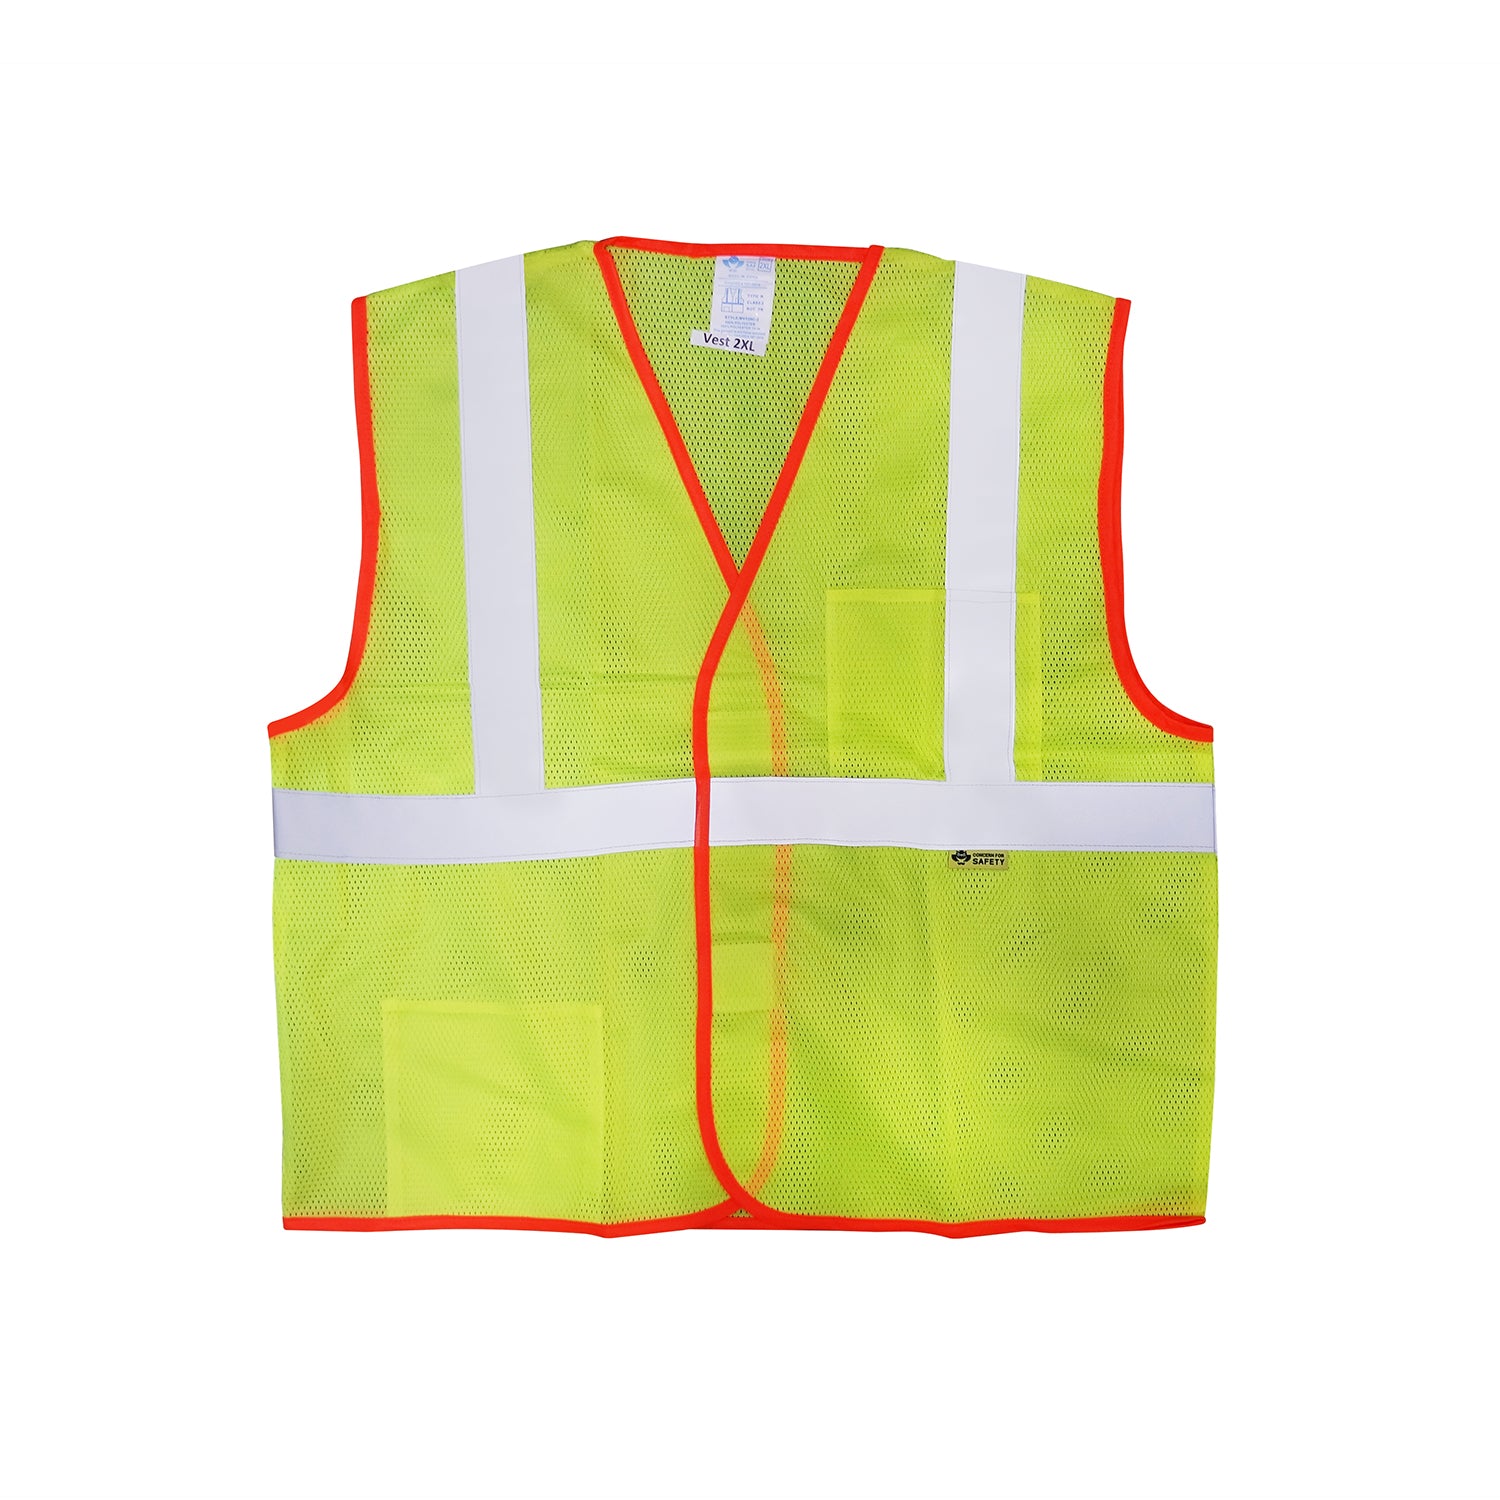 WW Safety Vest - 2XL, Lime -Safety- eGPS Solutions Inc.